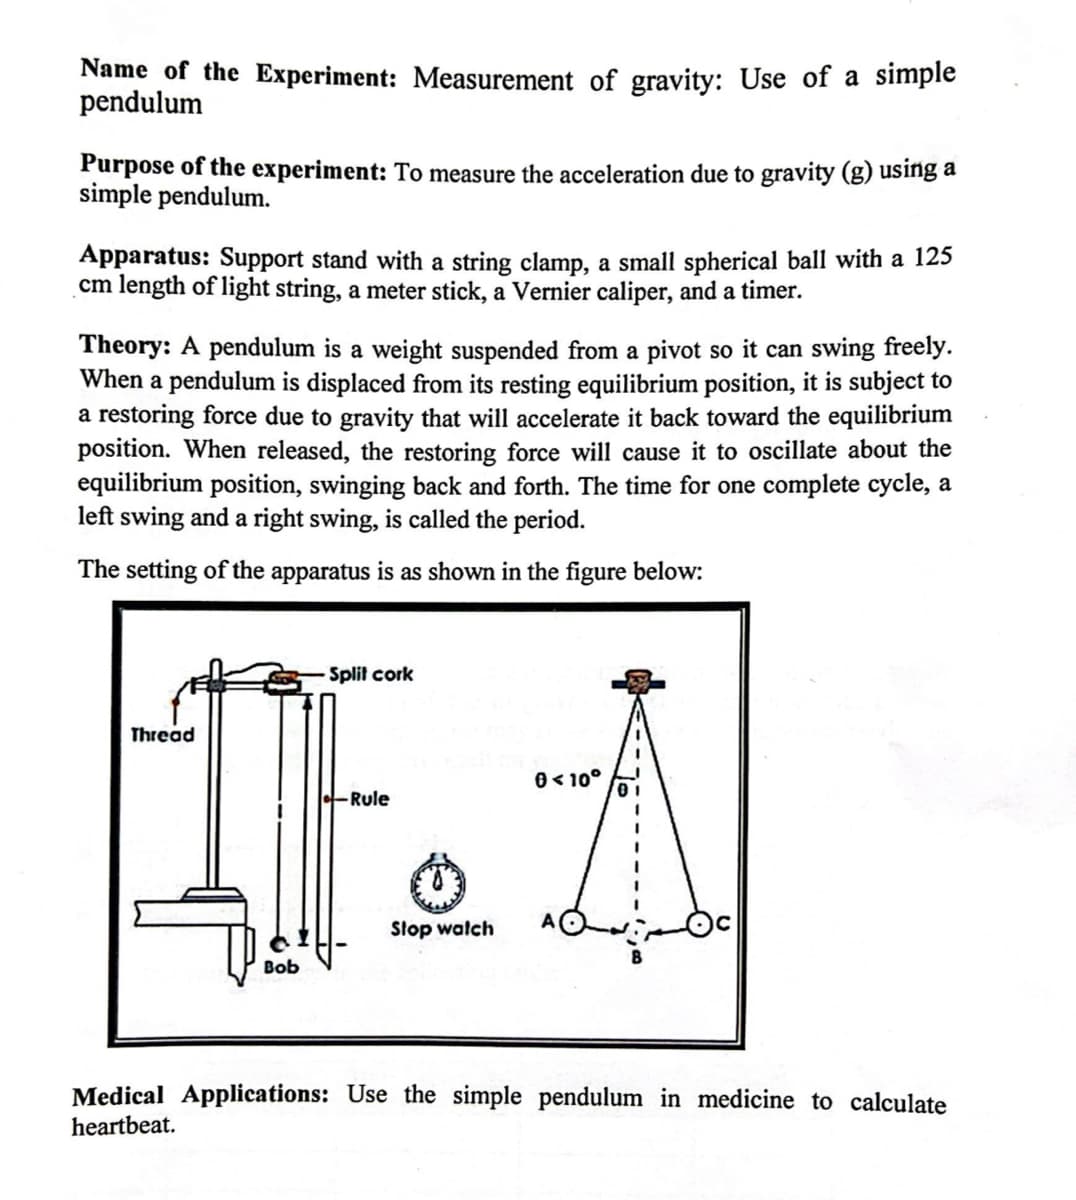 Name of the Experiment: Measurement of gravity: Use of a simple
pendulum
Purpose of the experiment: To measure the acceleration due to gravity (g) using a
simple pendulum.
Apparatus: Support stand with a string clamp, a small spherical ball with a 125
cm length of light string, a meter stick, a Vernier caliper, and a timer.
Theory: A pendulum is a weight suspended from a pivot so it can swing freely.
When a pendulum is displaced from its resting equilibrium position, it is subject to
a restoring force due to gravity that will accelerate it back toward the equilibrium
position. When released, the restoring force will cause it to oscillate about the
equilibrium position, swinging back and forth. The time for one complete cycle, a
left swing and a right swing, is called the period.
The setting of the apparatus is as shown in the figure below:
-Split cork
0 <10°
-Rule
IF.A
Stop watch
Thread
Bob
Medical Applications: Use the simple pendulum in medicine to calculate
heartbeat.